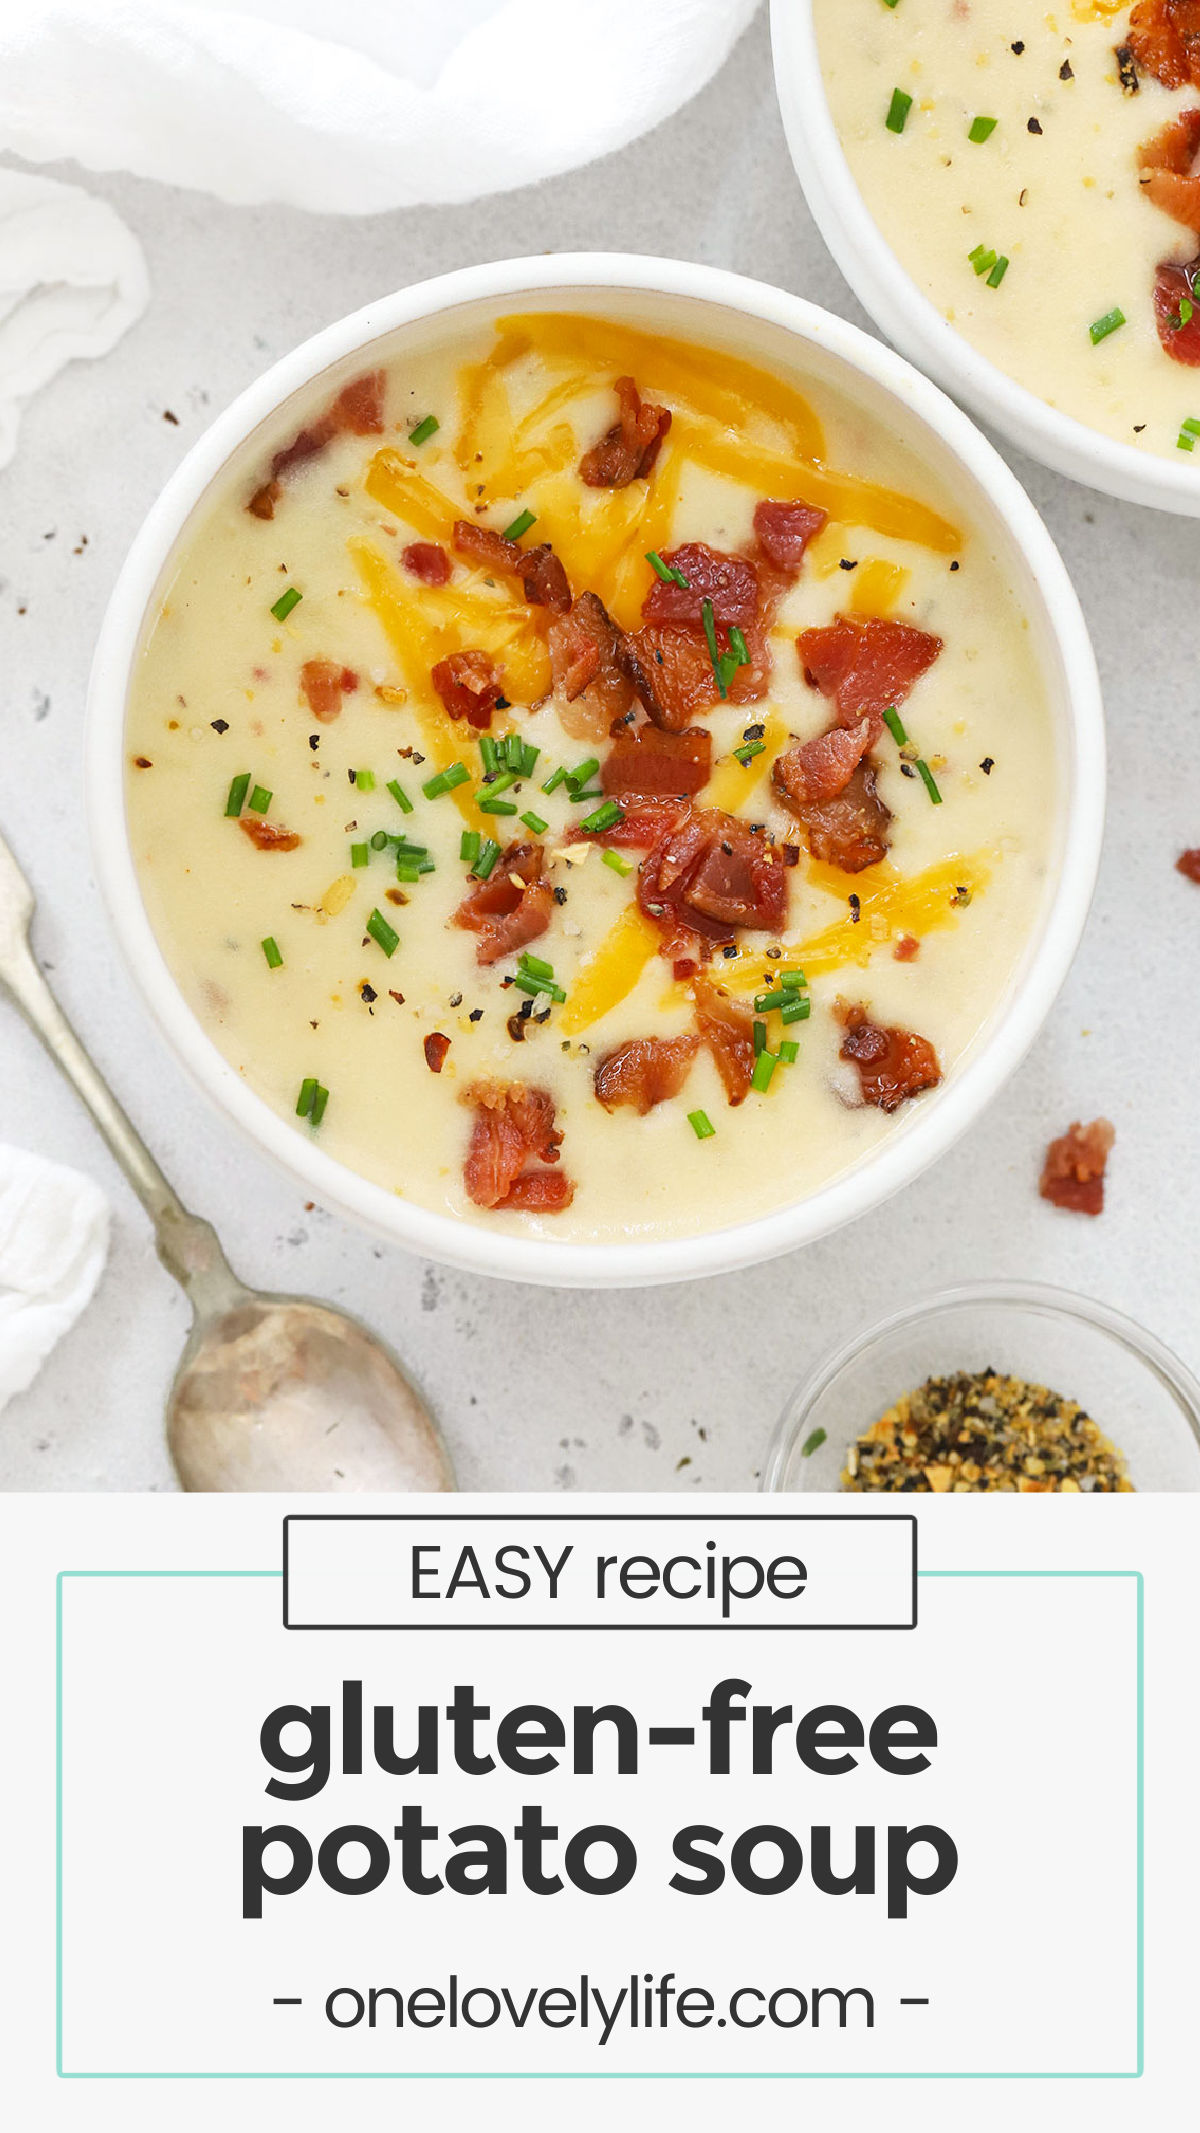 Our Gluten-Free Potato Soup recipe feels like a loaded baked potato! It's creamy, filling, and topped with goodies. It's perfect for a chilly night! // gluten free soup recipe / gluten free loaded baked potato soup / gluten free baked potato soup recipe / gluten free comfort food / the best potato soup recipe / best gluten-free potato soup recipe /